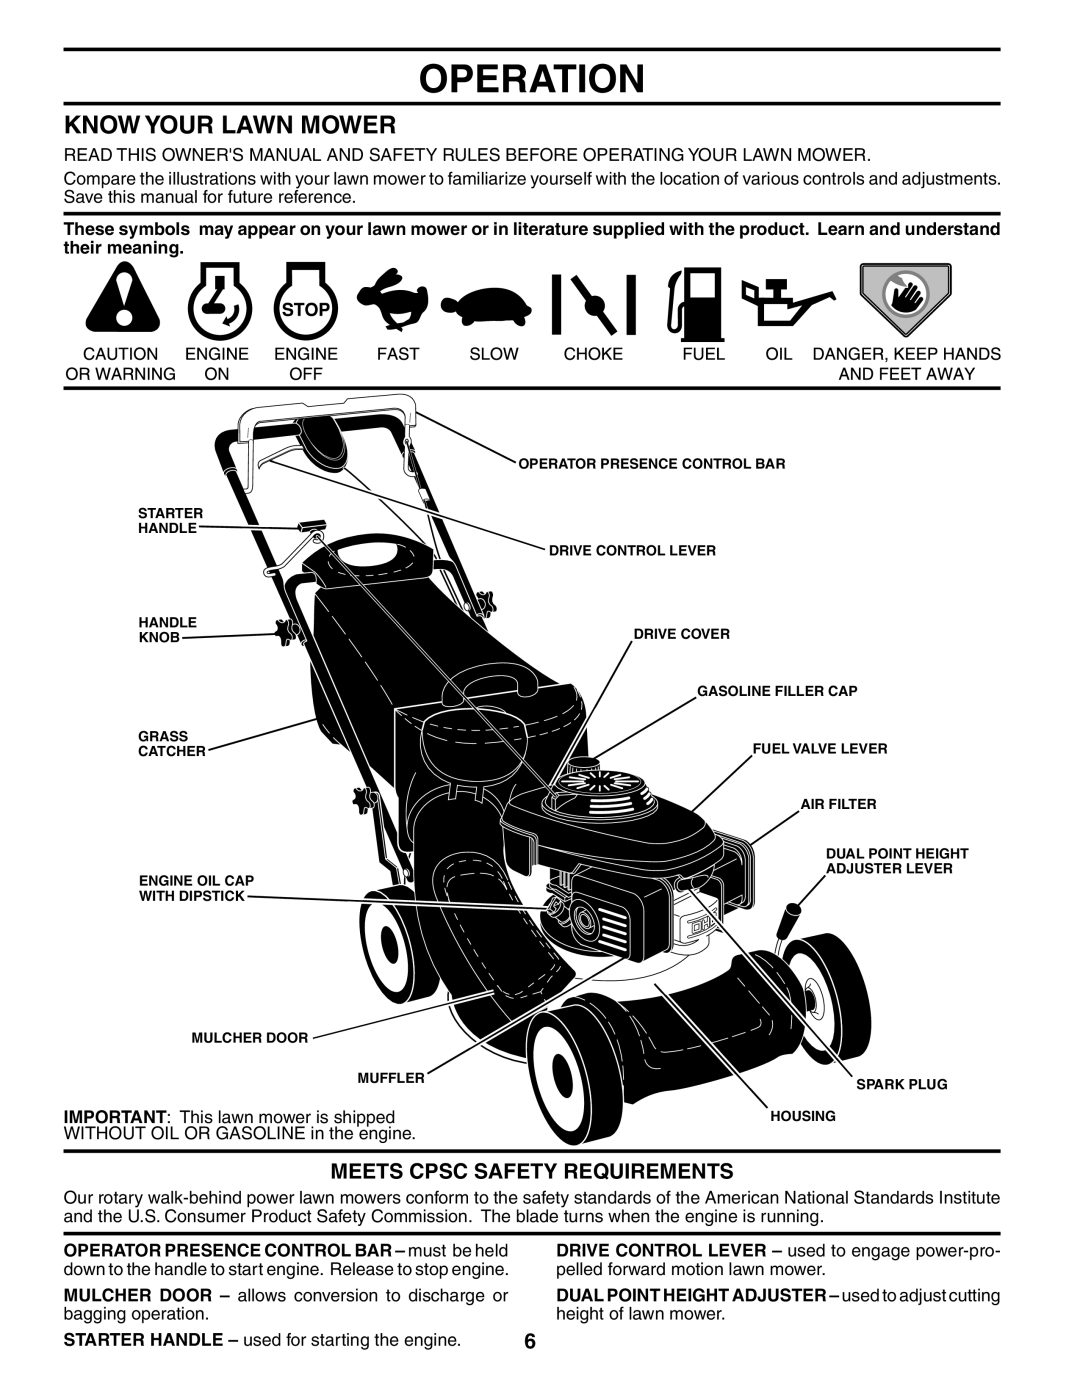 Husqvarna 55R21HVL owner manual Operation, Know Your Lawn Mower, Meets Cpsc Safety Requirements 